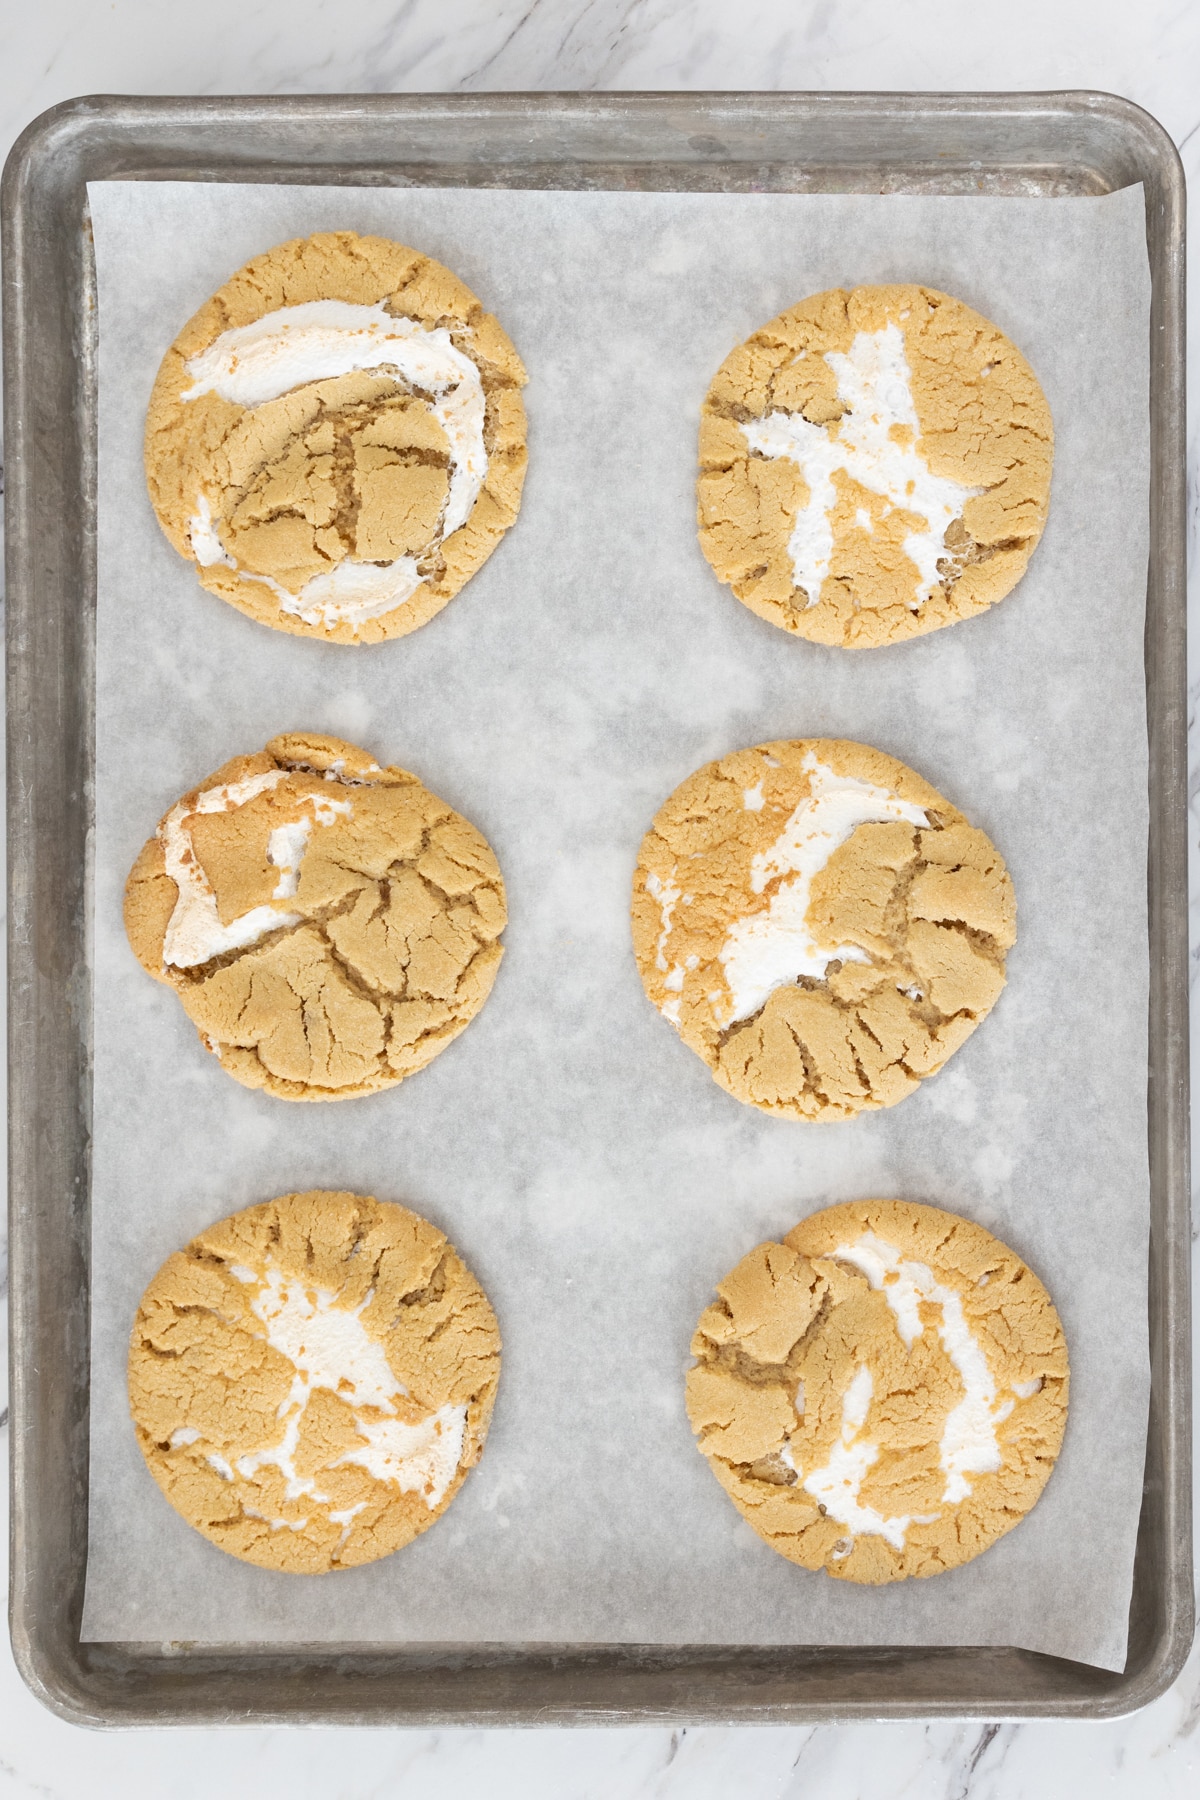 Top view of Fluffernutter Cookies on a baking tray lined with parchment paper.